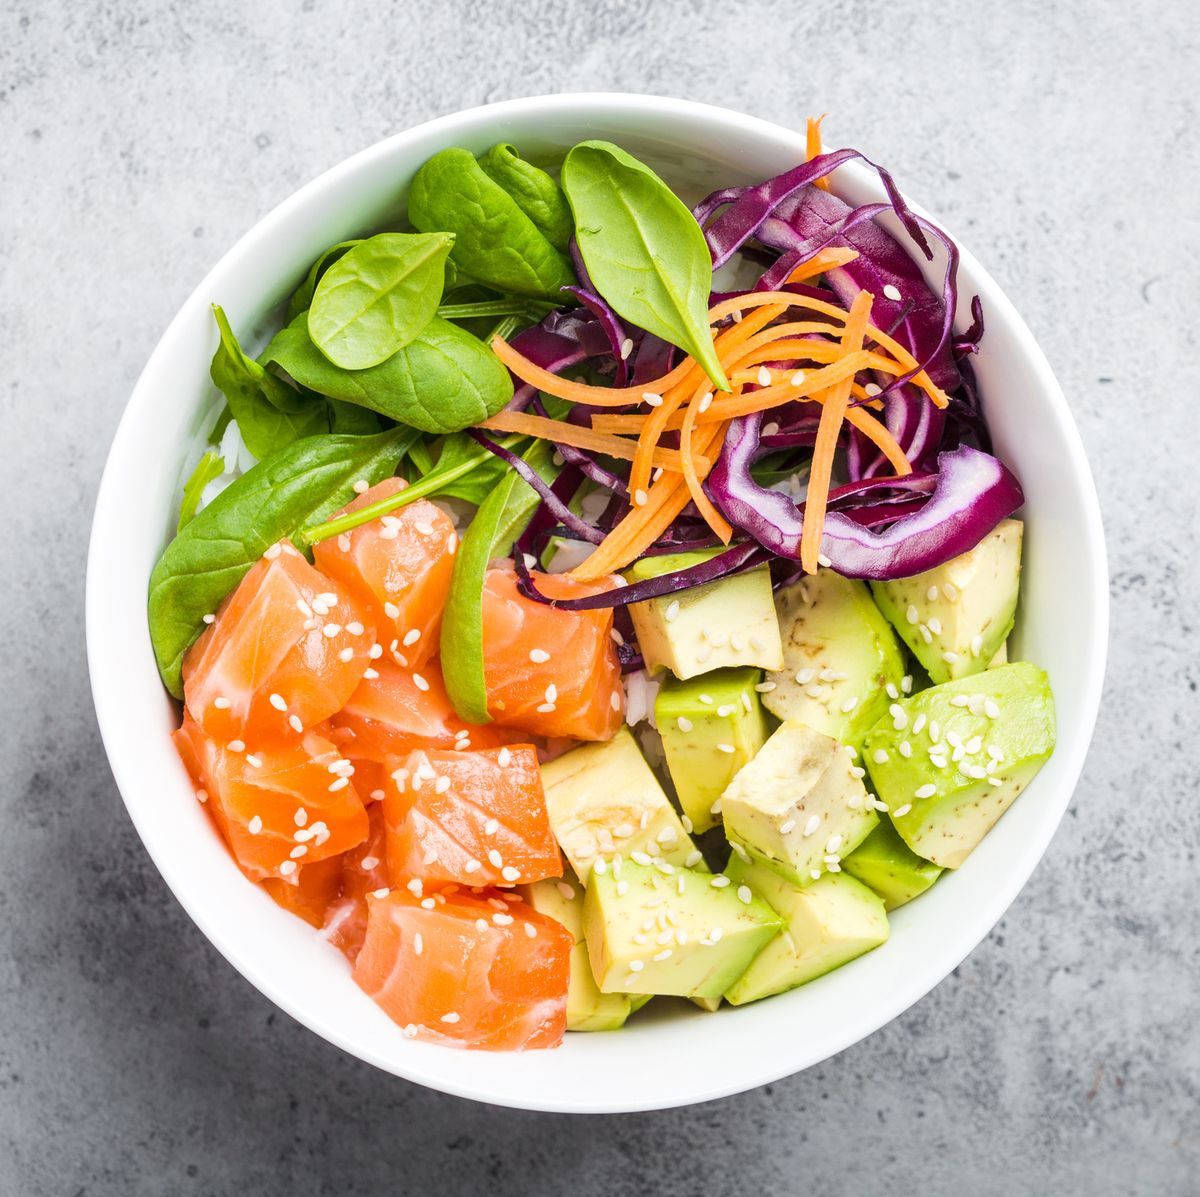 poke bowl with salmon, spinach, avocado, carrot, and red cabbage